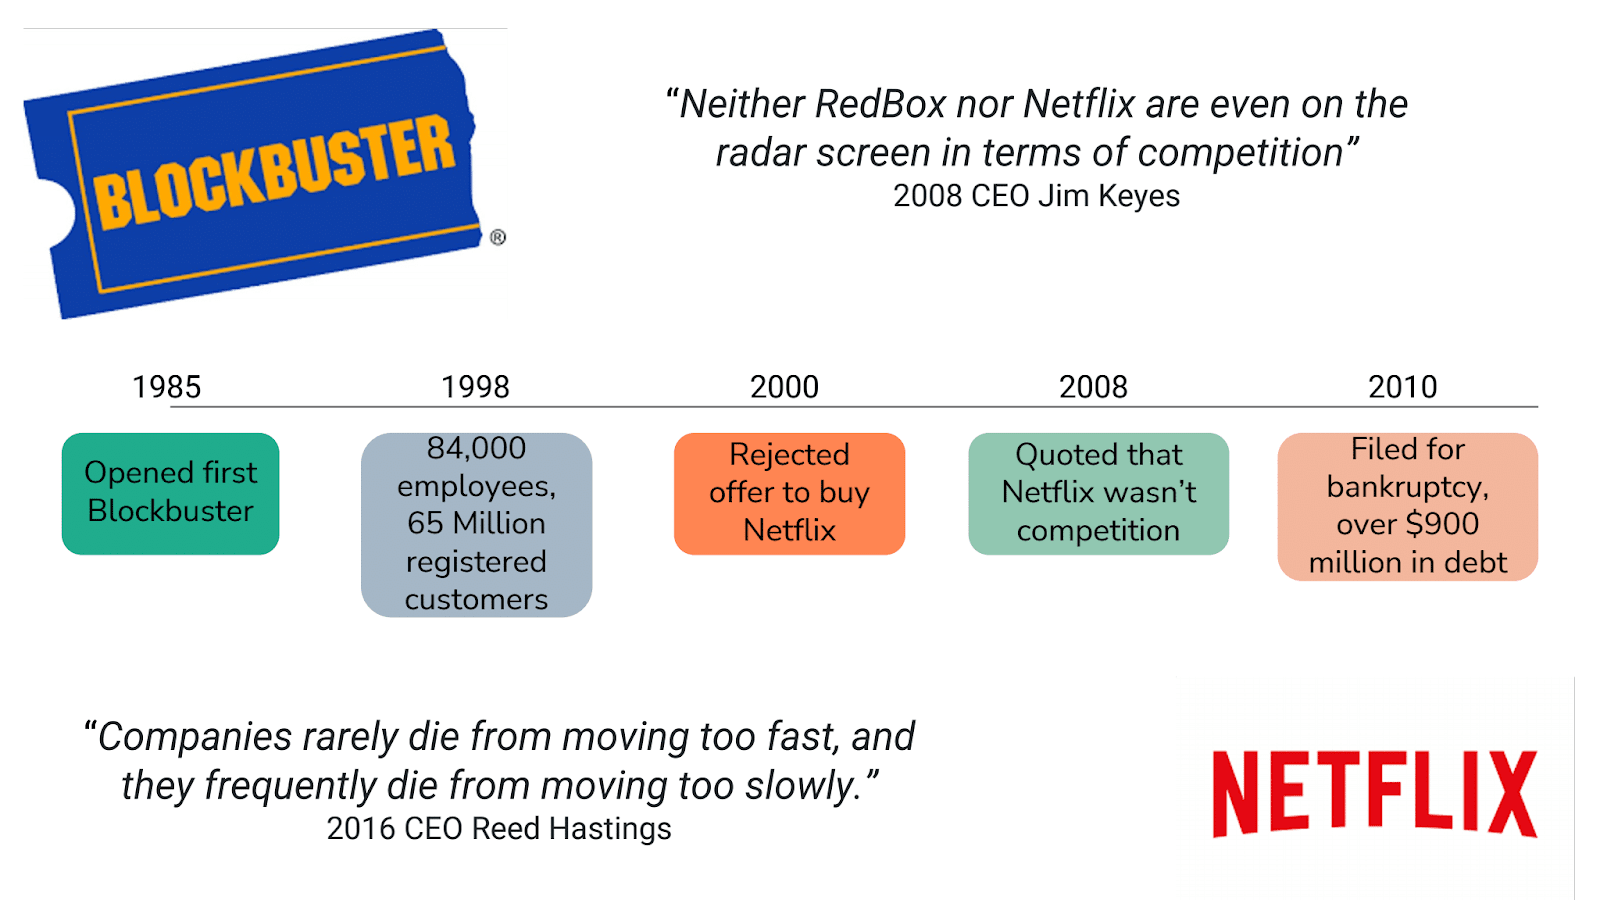 Blockbuster's timeline plus two quotes: "Neither RedBox nor Netflix are even on the radar screen in terms of competition" – Blockbuster CEO Jim Keyes 2008, and "Companies rarely die from moving too fast, and they frequently die from moving too slowly." – Netflix CEO Reed Hastings 2016